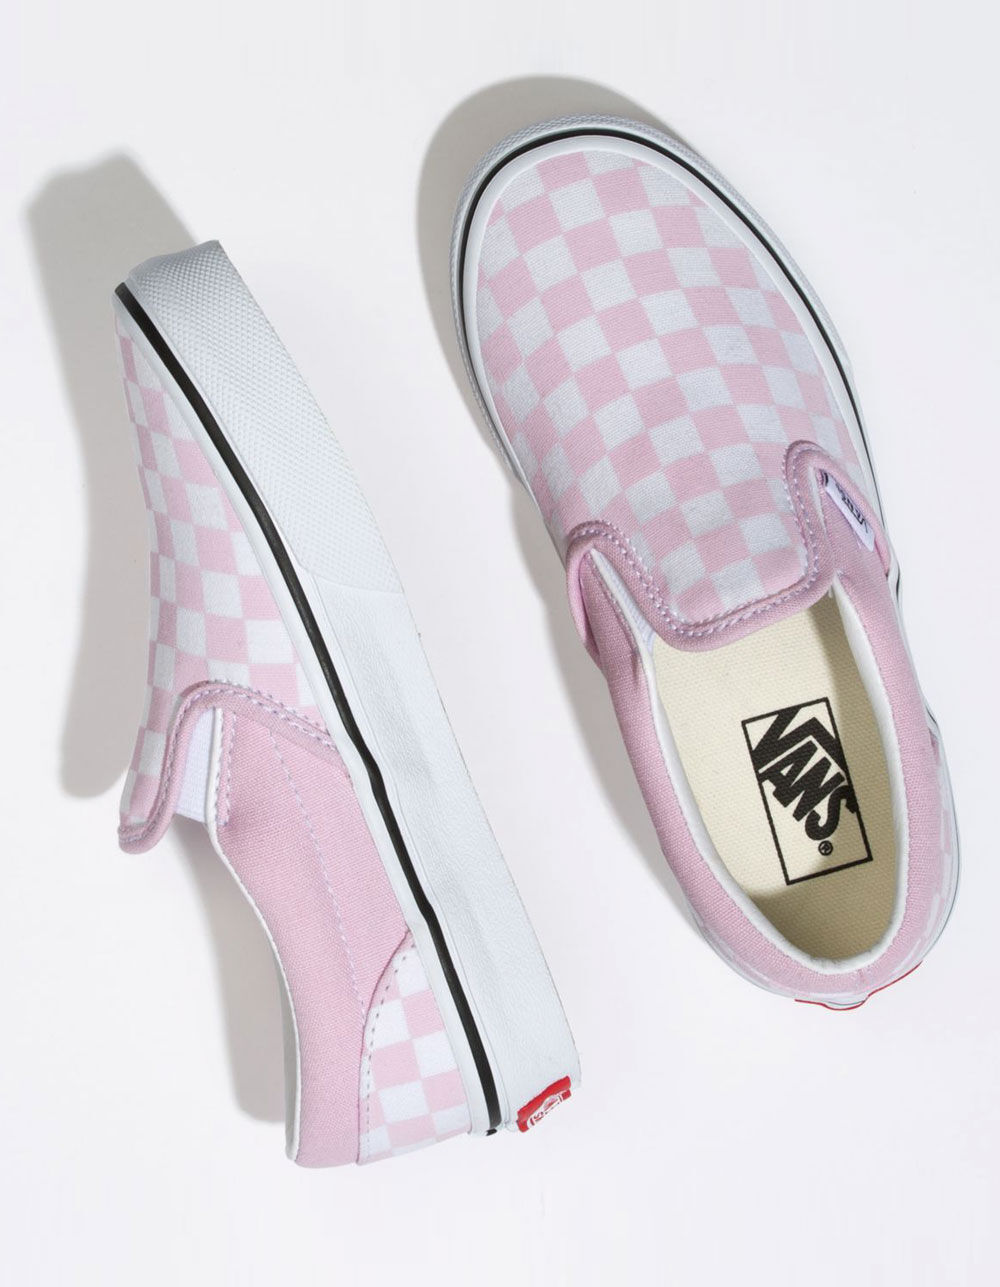 VANS Checkerboard Classic Slip-On Lilac Snow & True White Girls Shoes ...